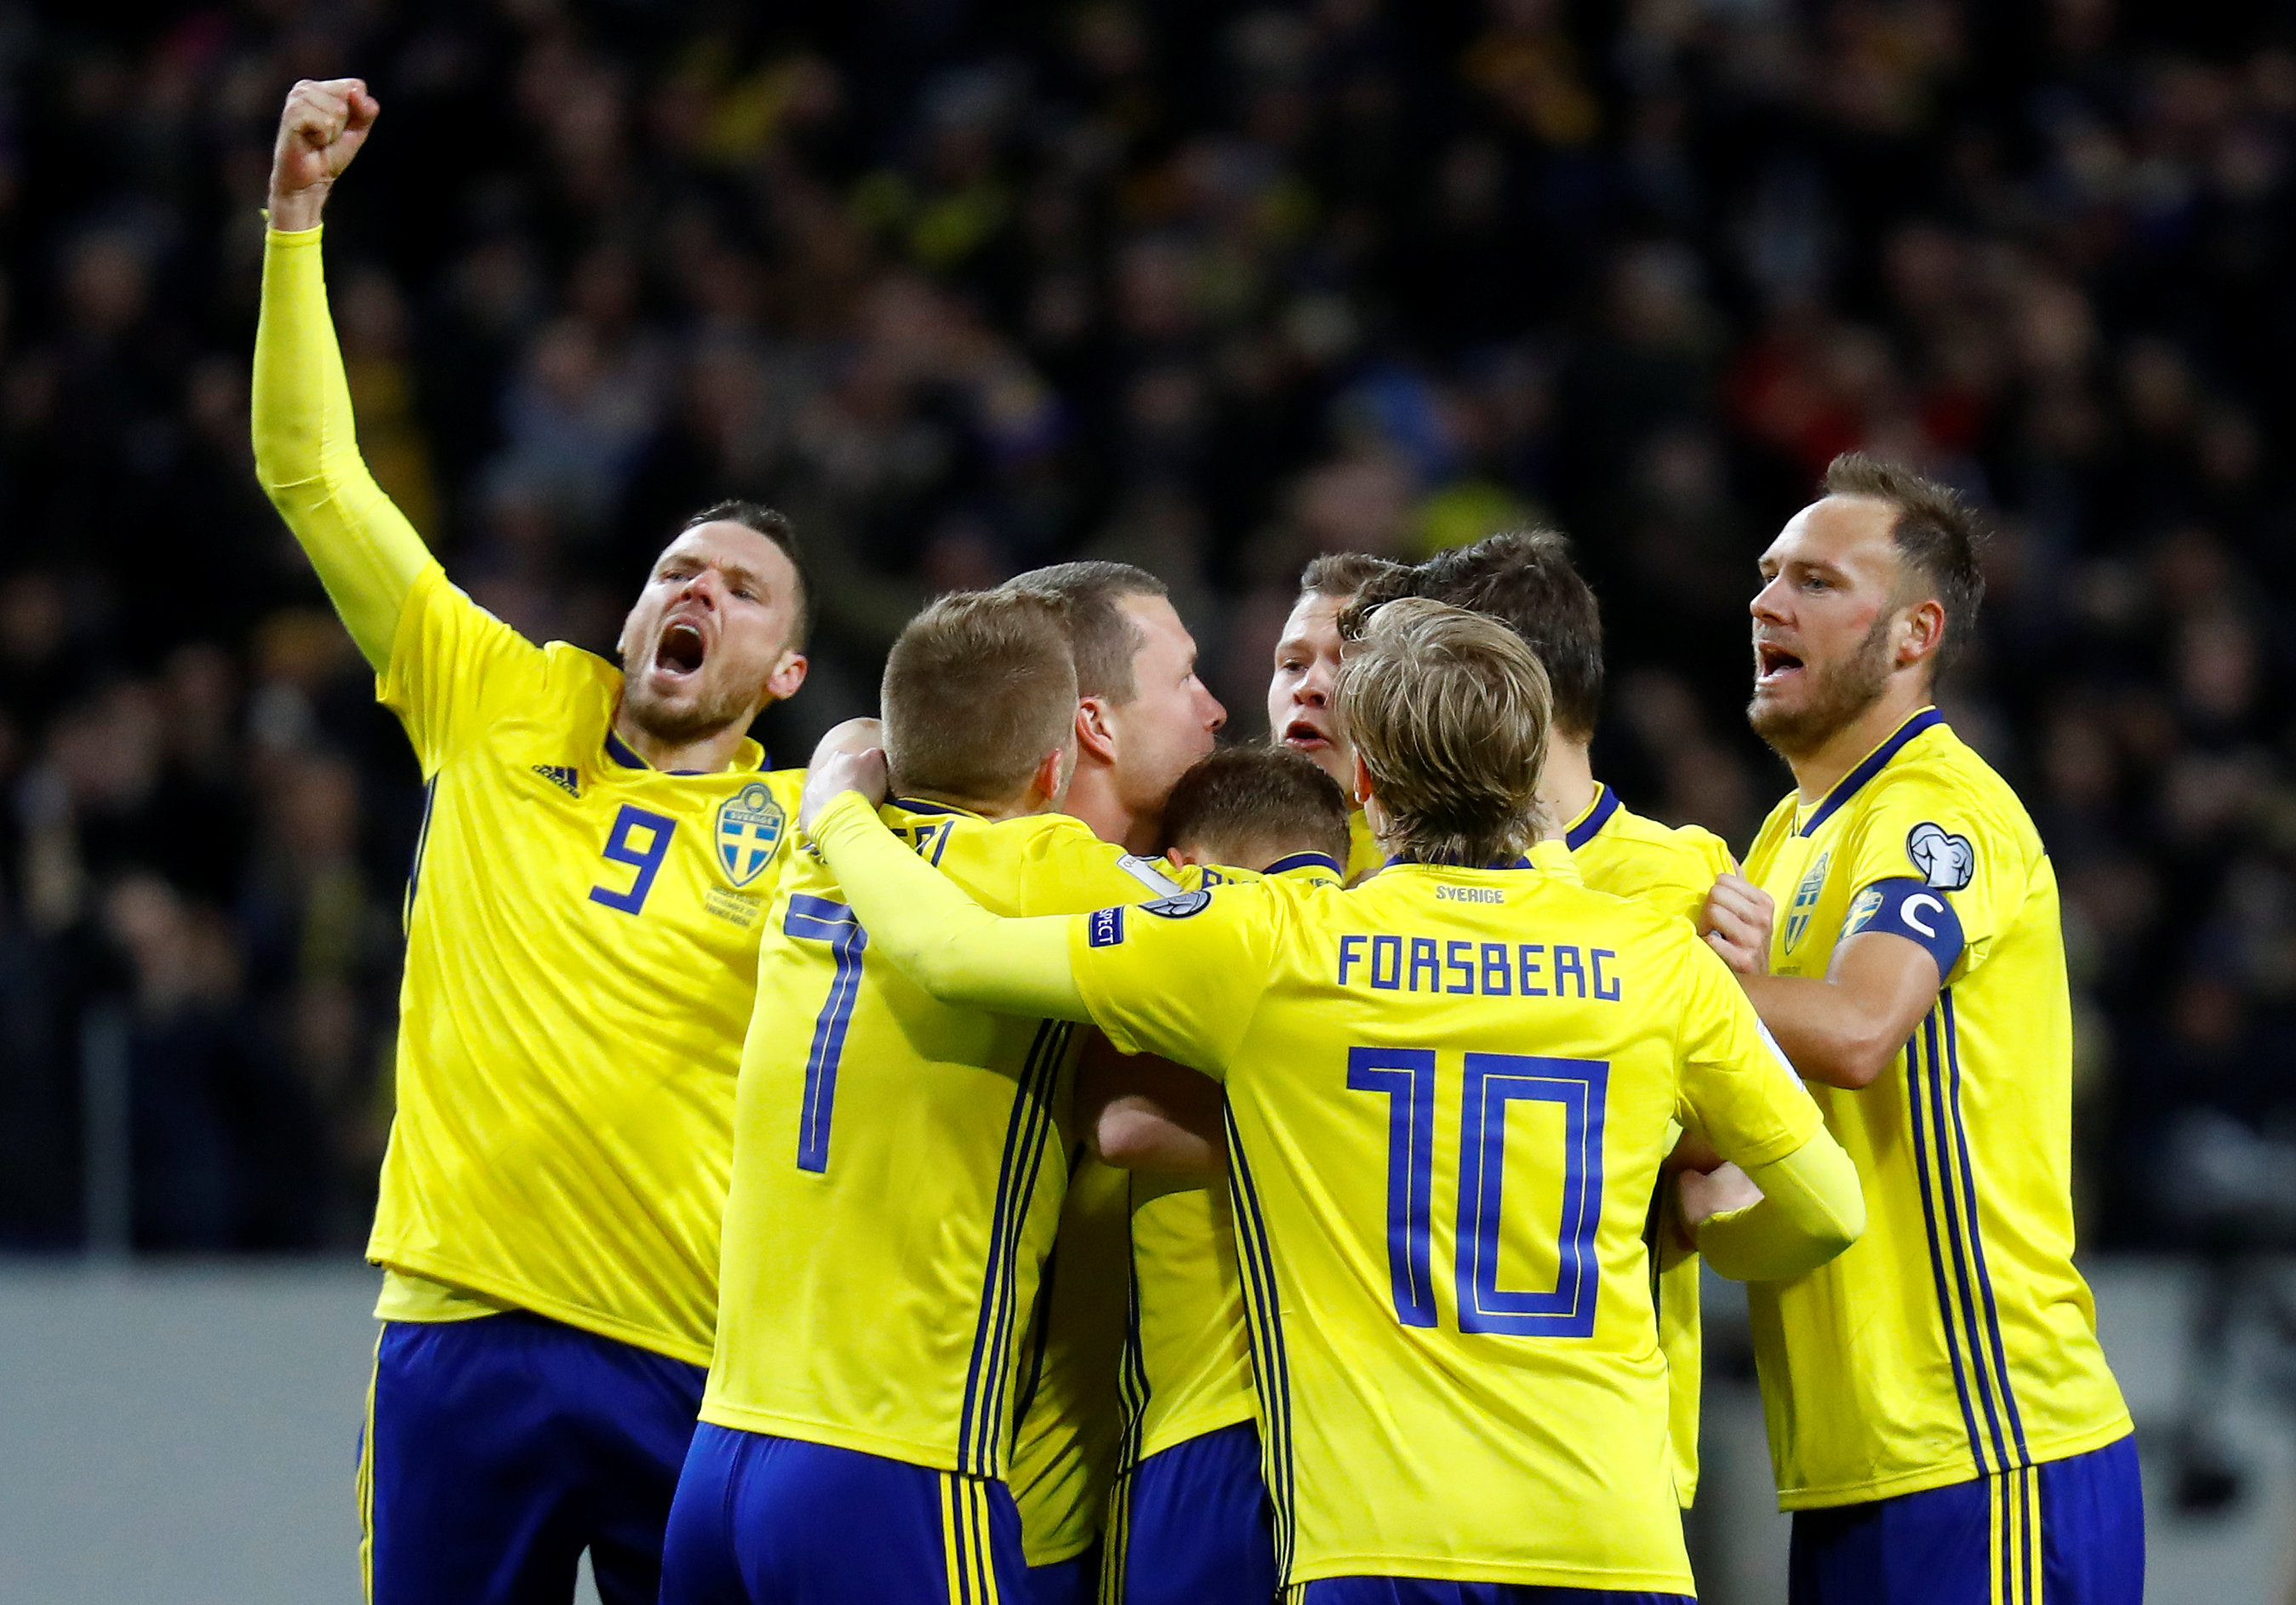 Football: 'Humble' Sweden taking nothing for granted against Italy